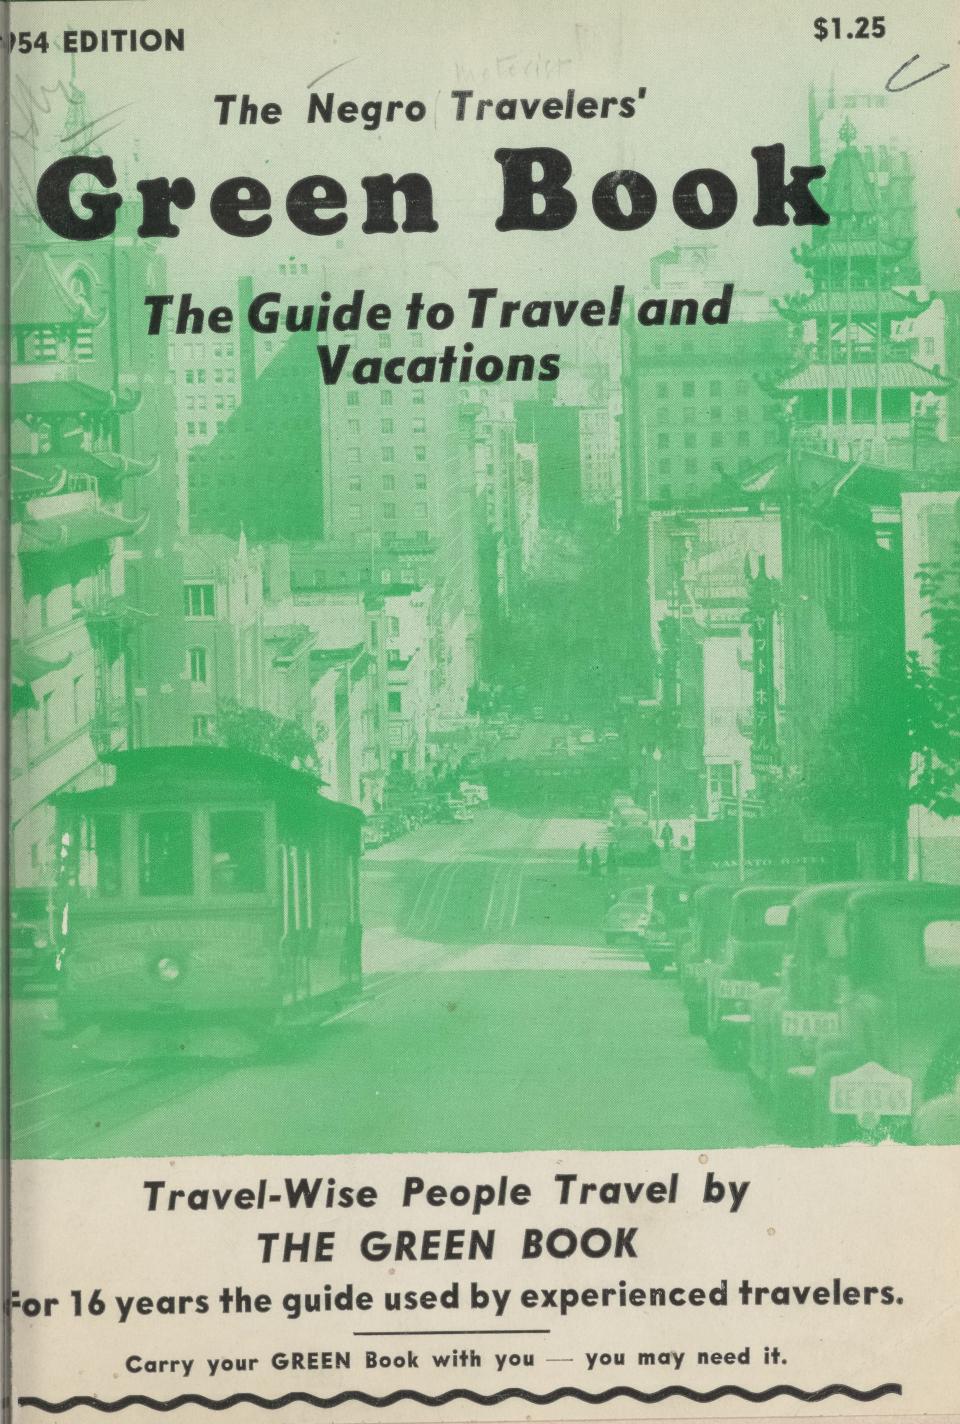 The 1954 edition of The Negro Travelers' Green Book was a guide for the most welcoming, and safest, places for people of color to stay, including on Cape Cod. It's on display as part of a new exhibit at Heritage Museums & Gardens in Sandwich.